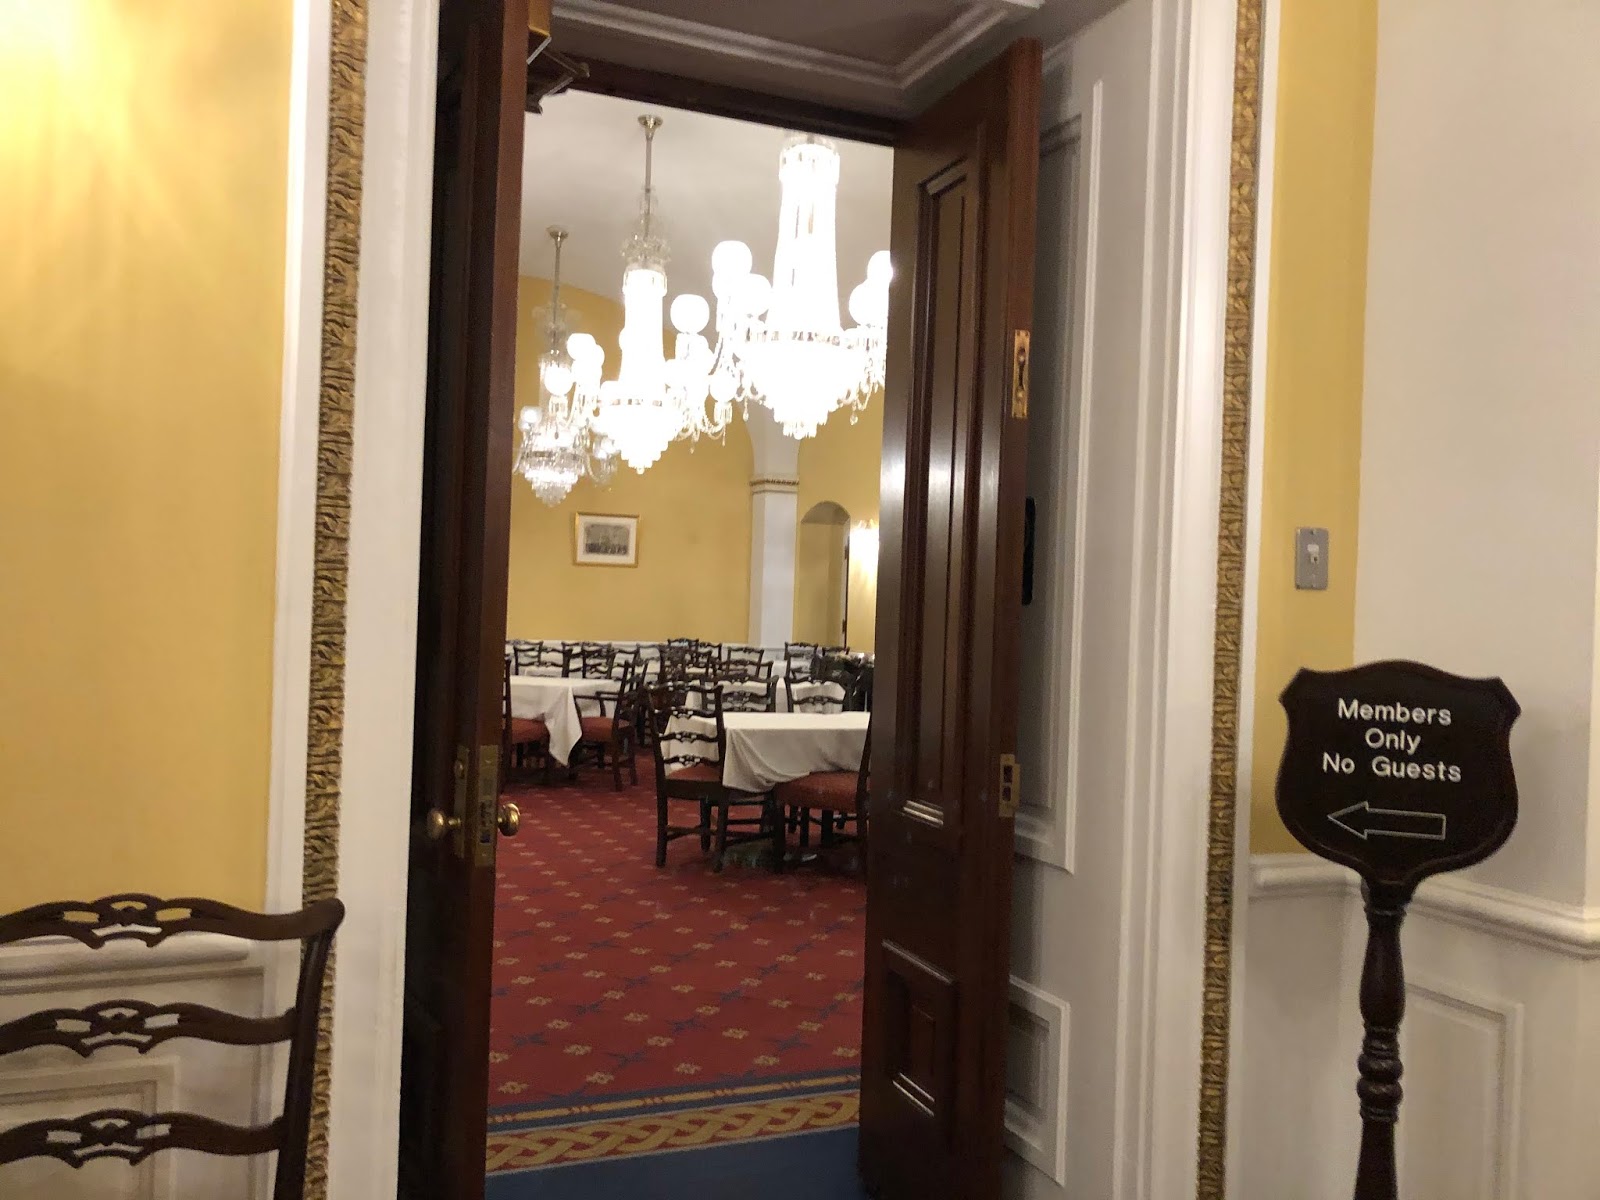 house of representatives dining room